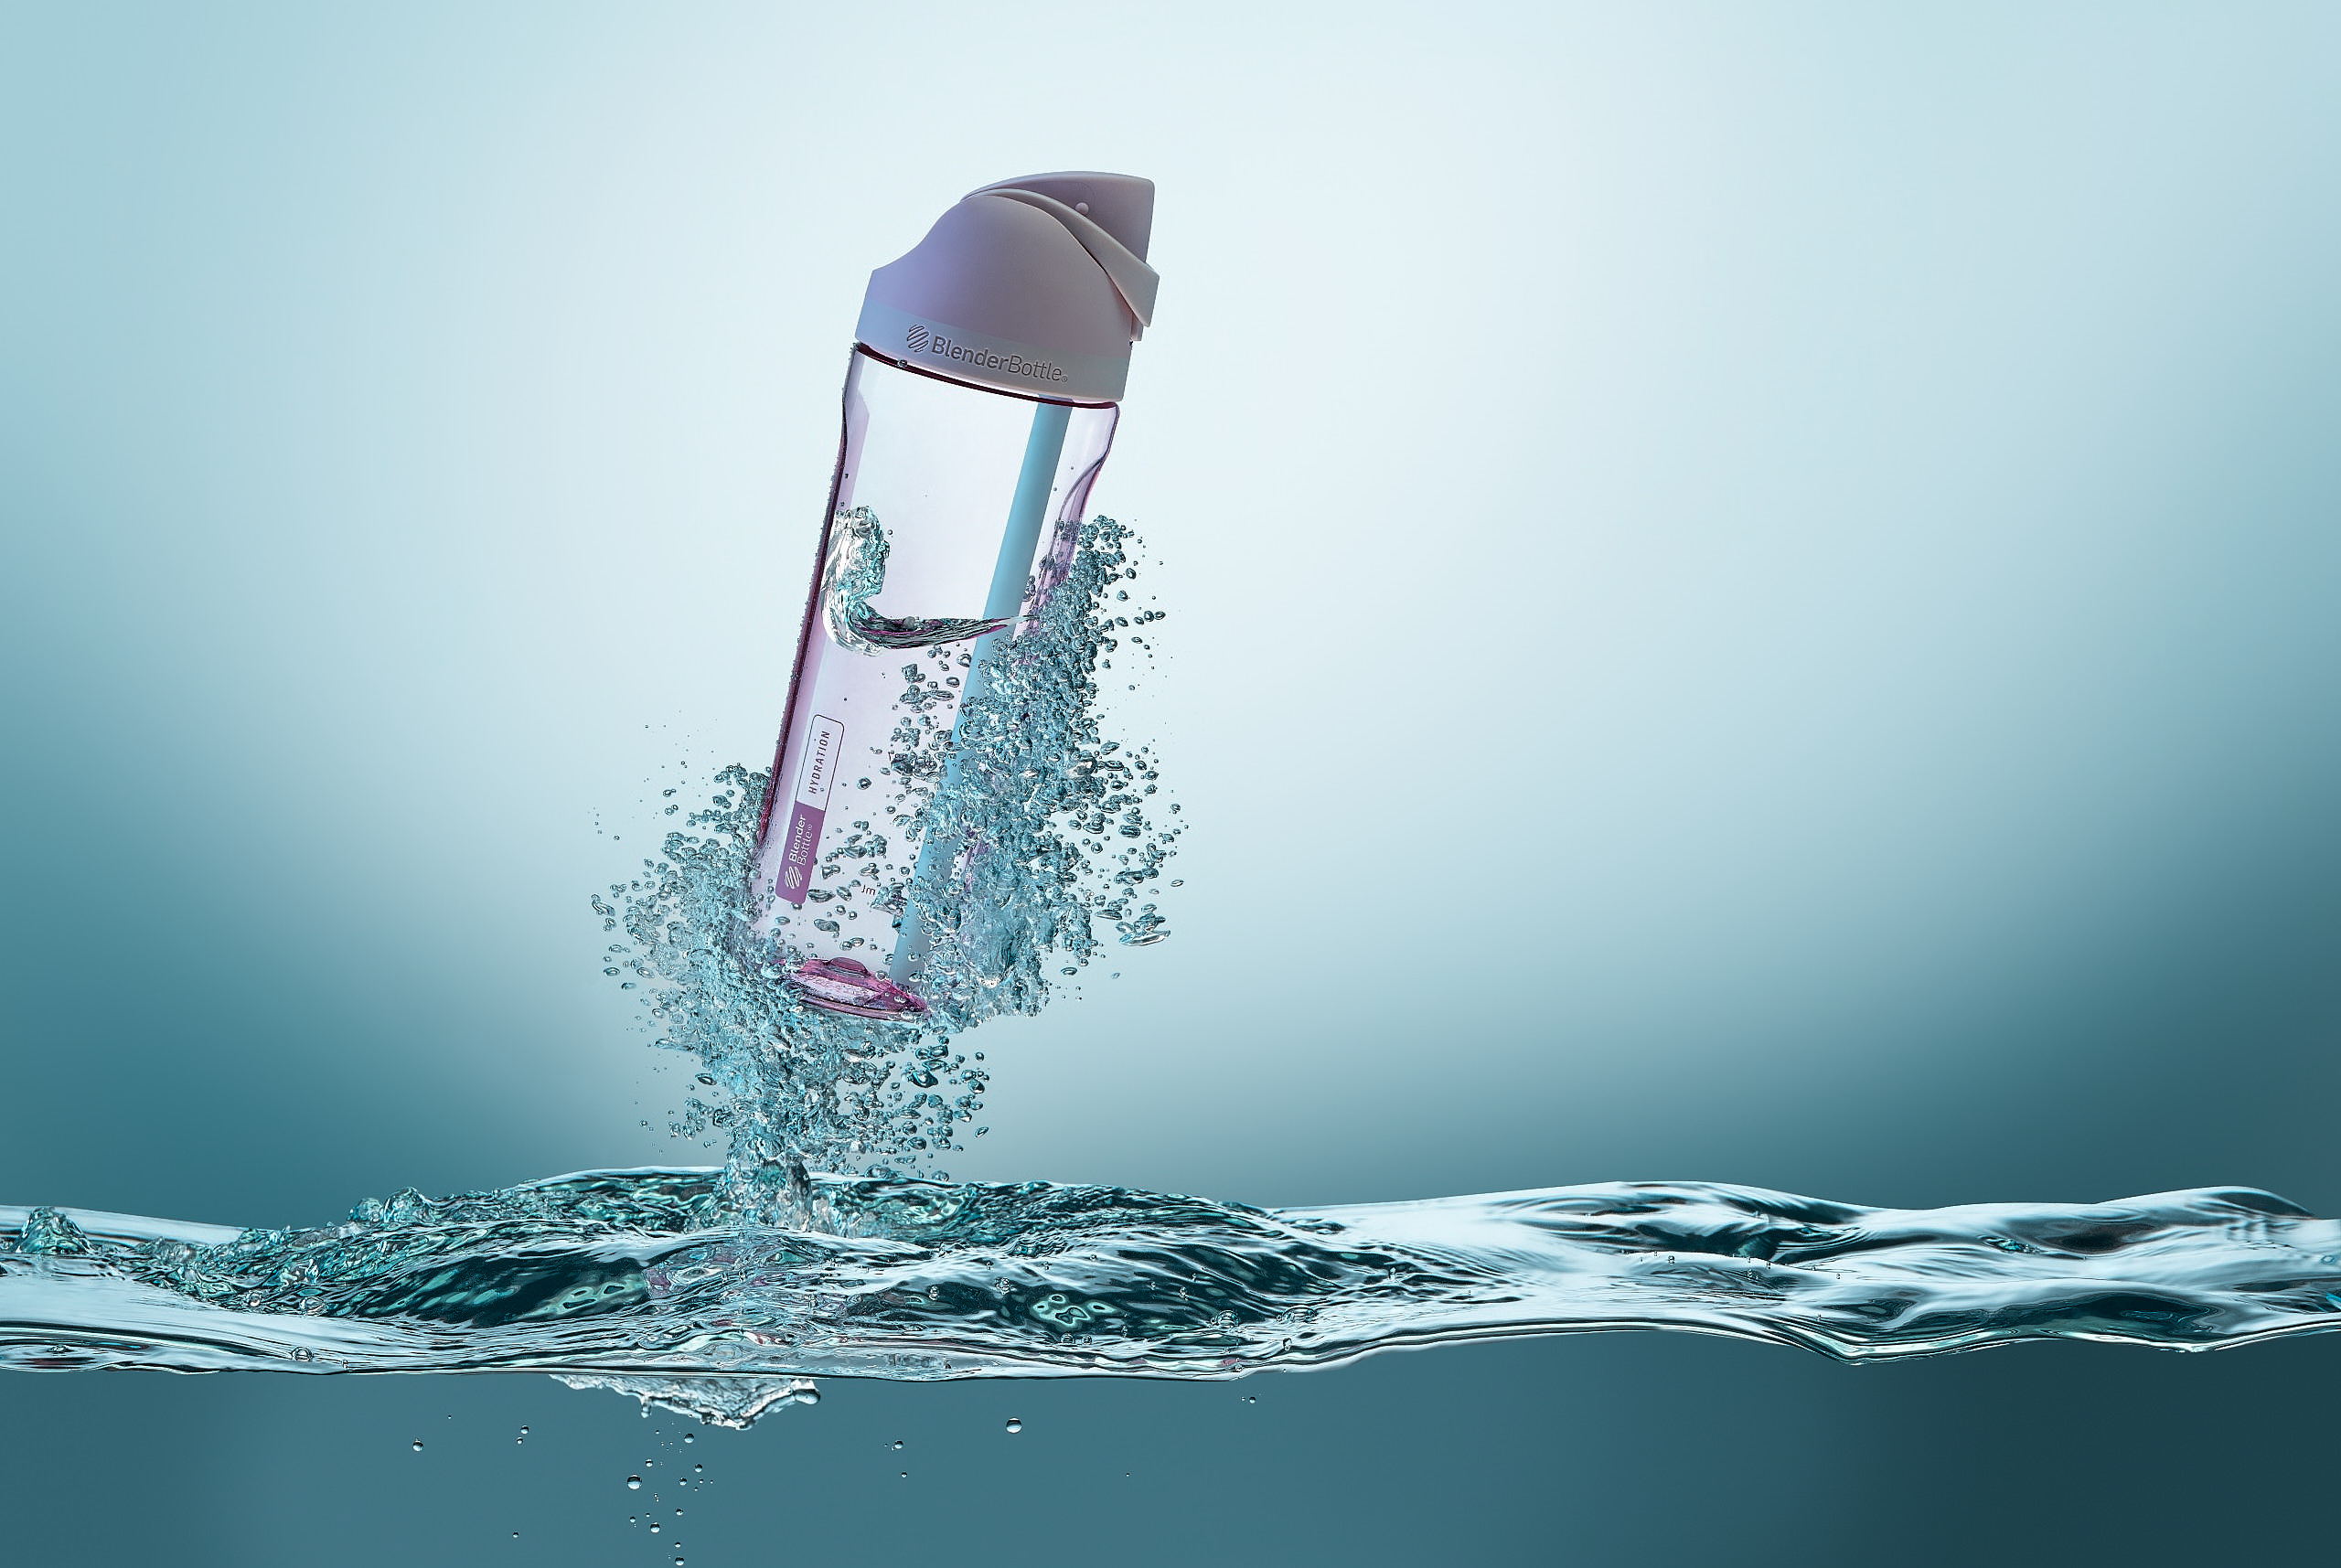 PINK SPORTS WATER BOTTLE SHOOTING OUT OF TEAL WATER WITH A BIG SPLASH 